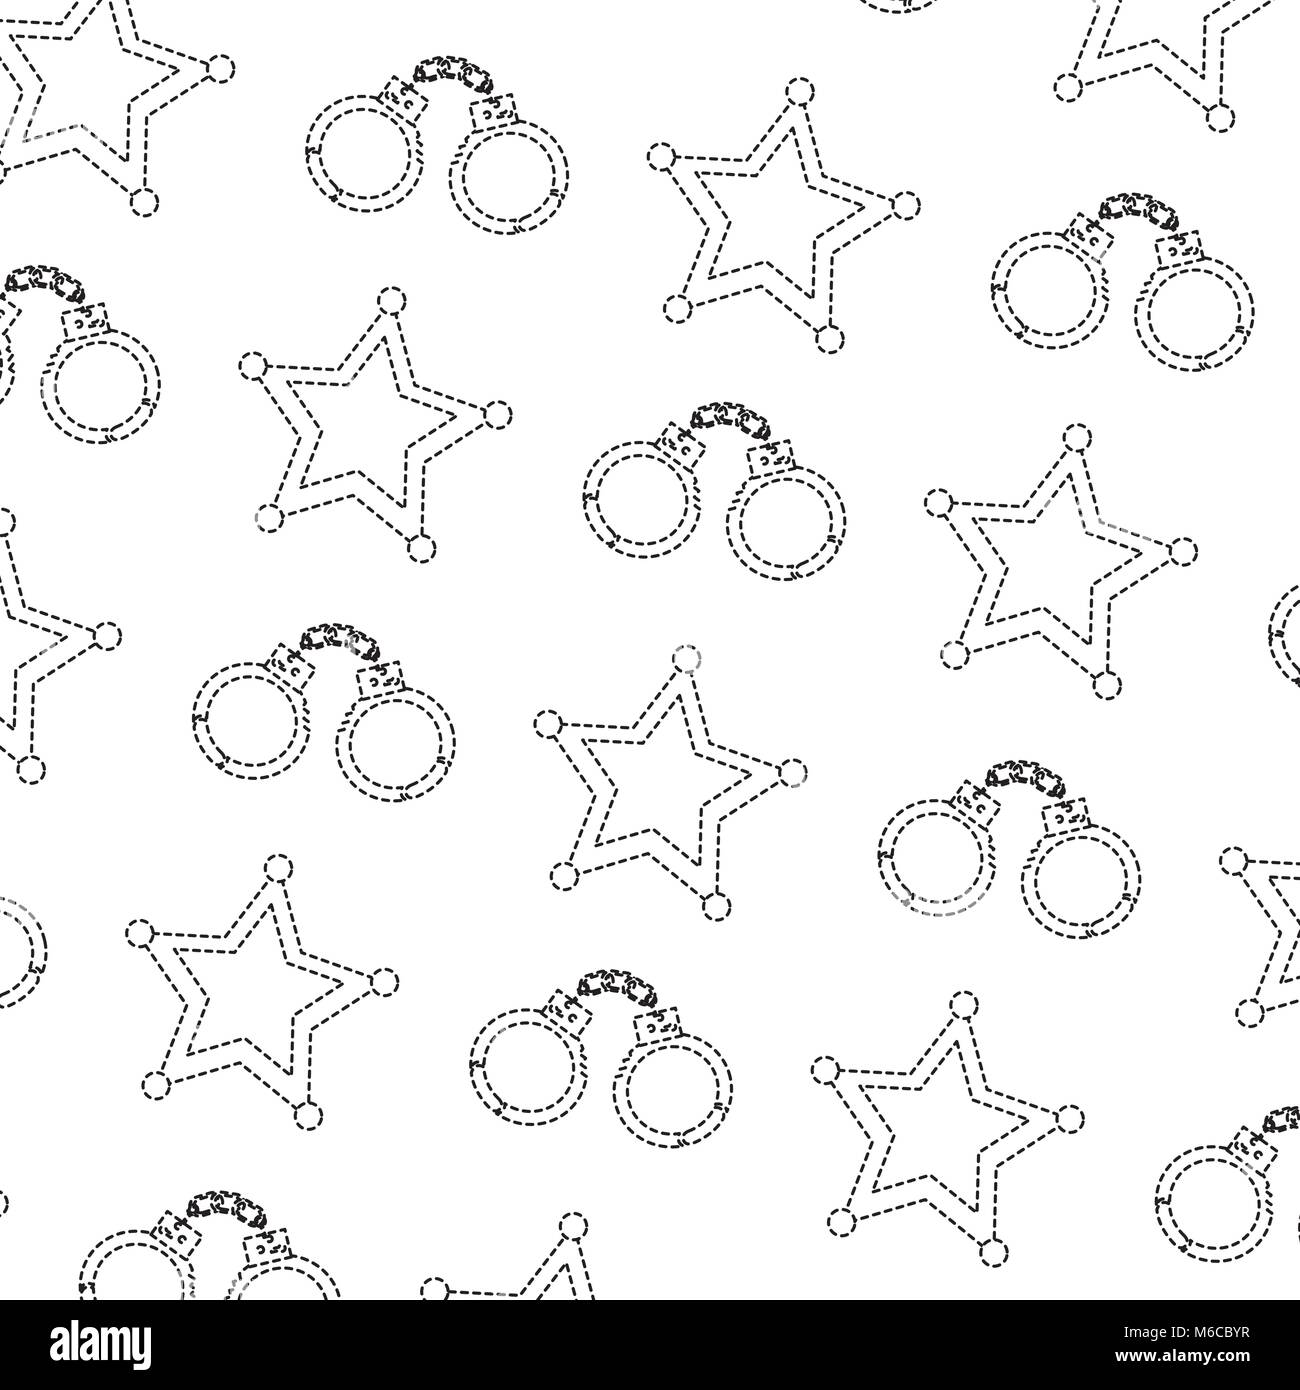 sheriff star and handcuffs police pattern image vector illustration design  black dotted line Stock Vector